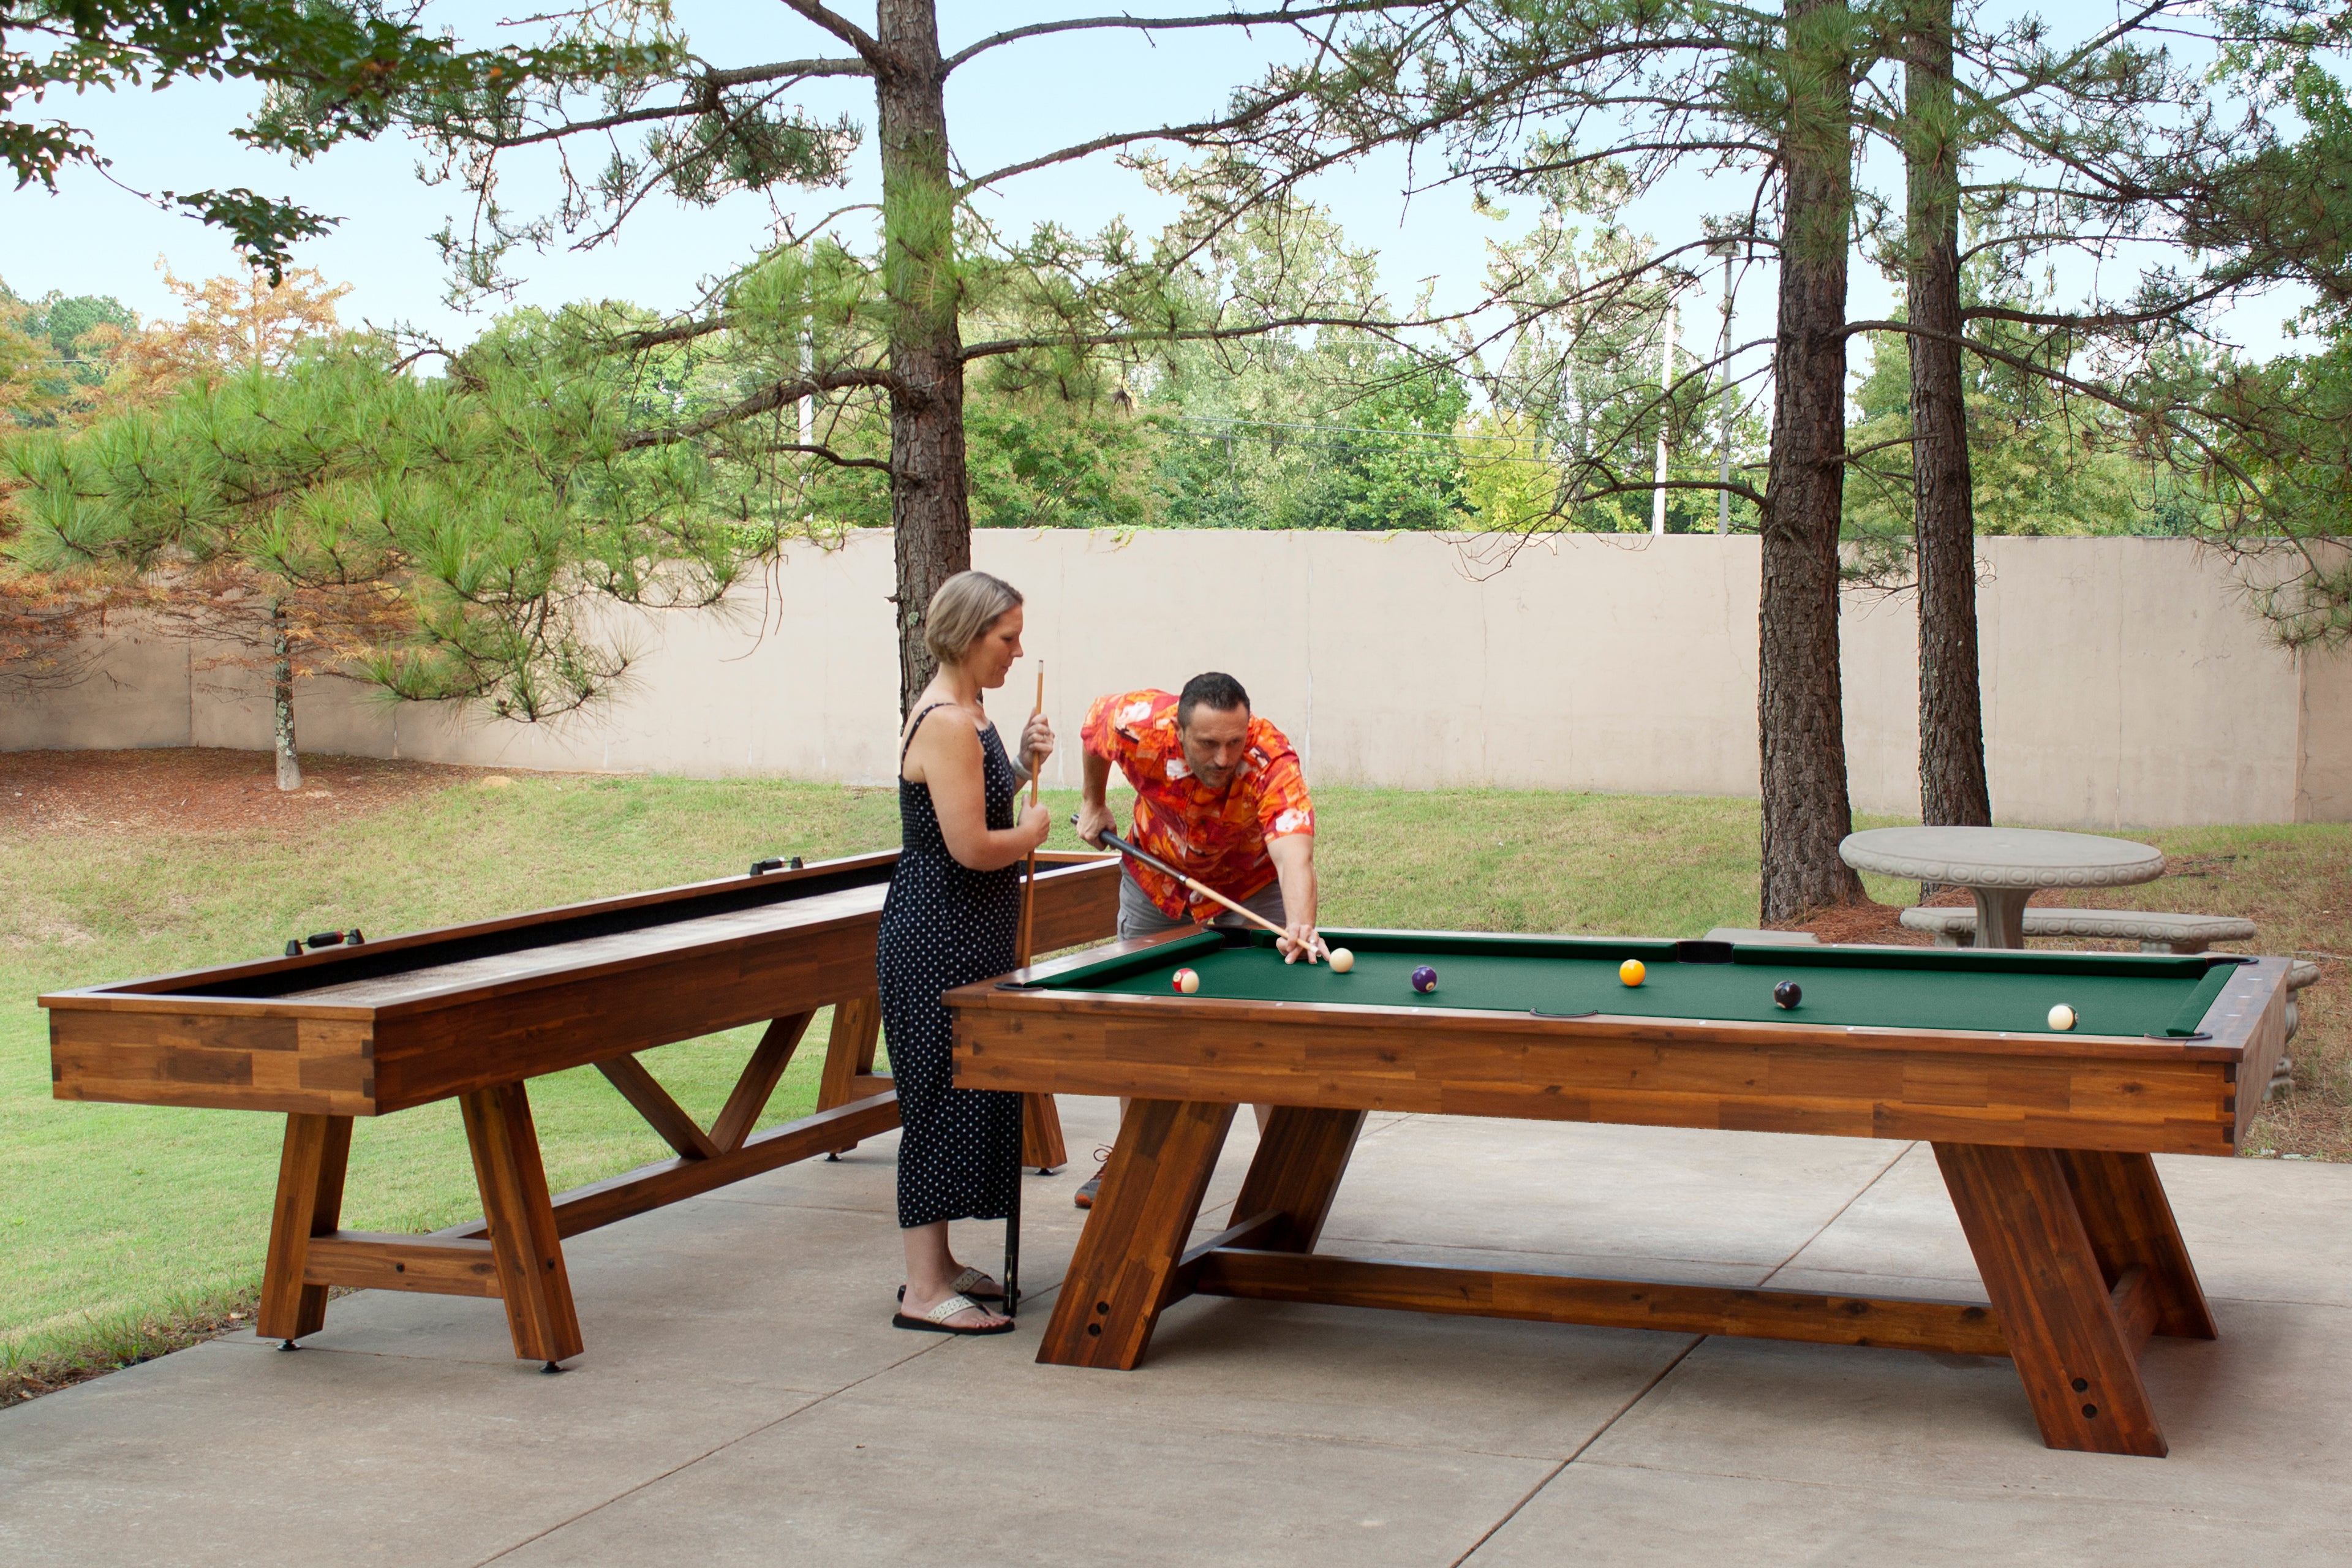 Legacy Billiards 8 Ft Barren Outdoor Pool Table in Natural Acacia Finish with People Playing Pool Outside and Emory Outdoor Shuffleboard